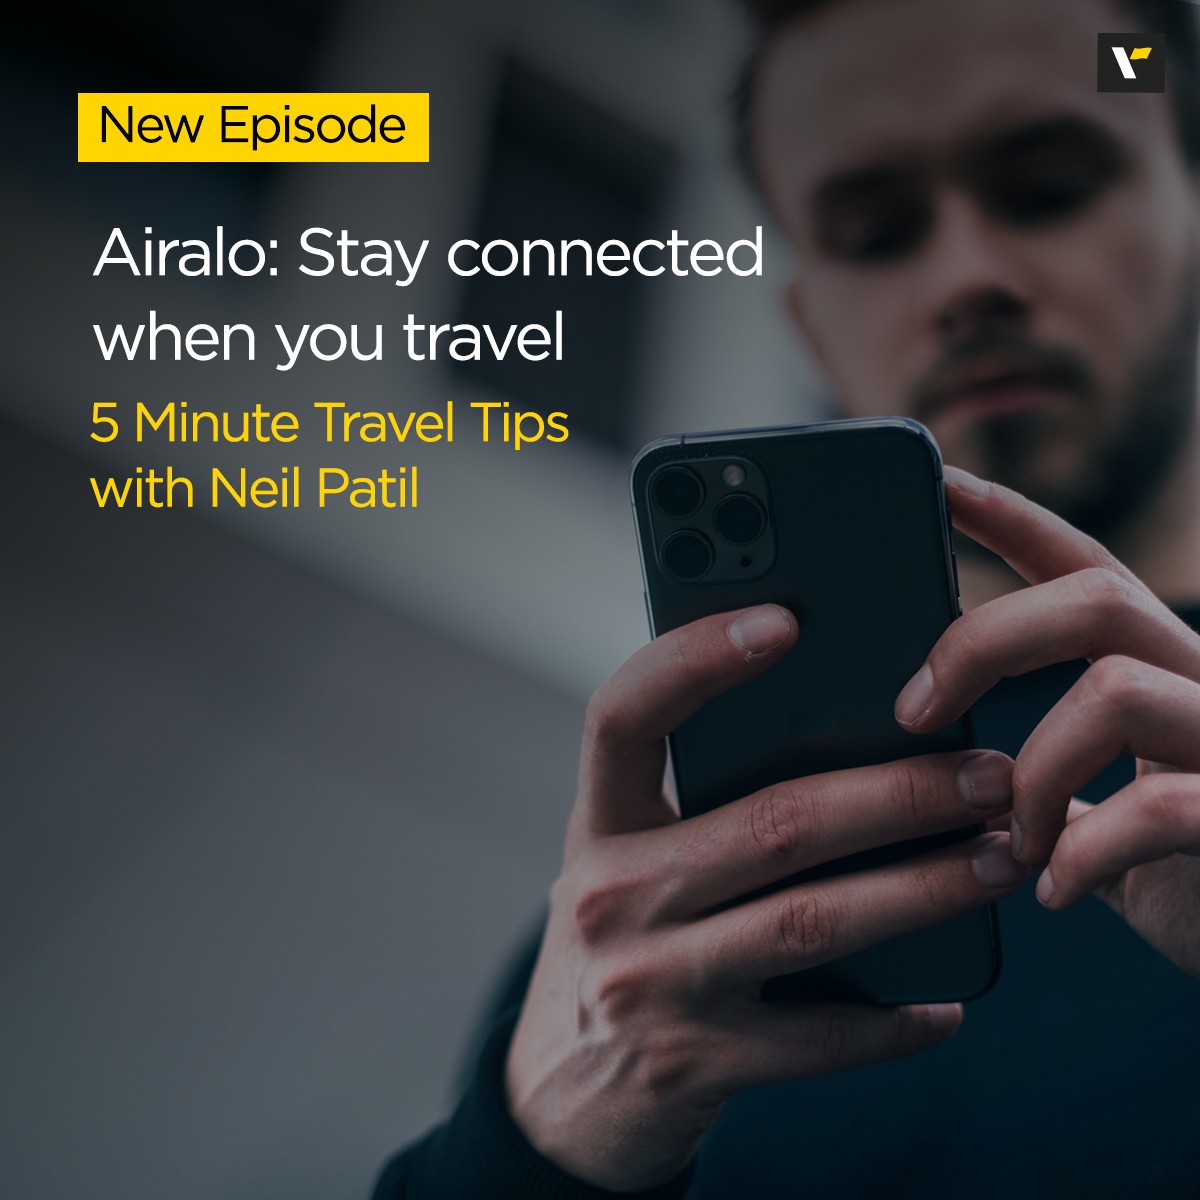 Airalo: Stay connected when you travel